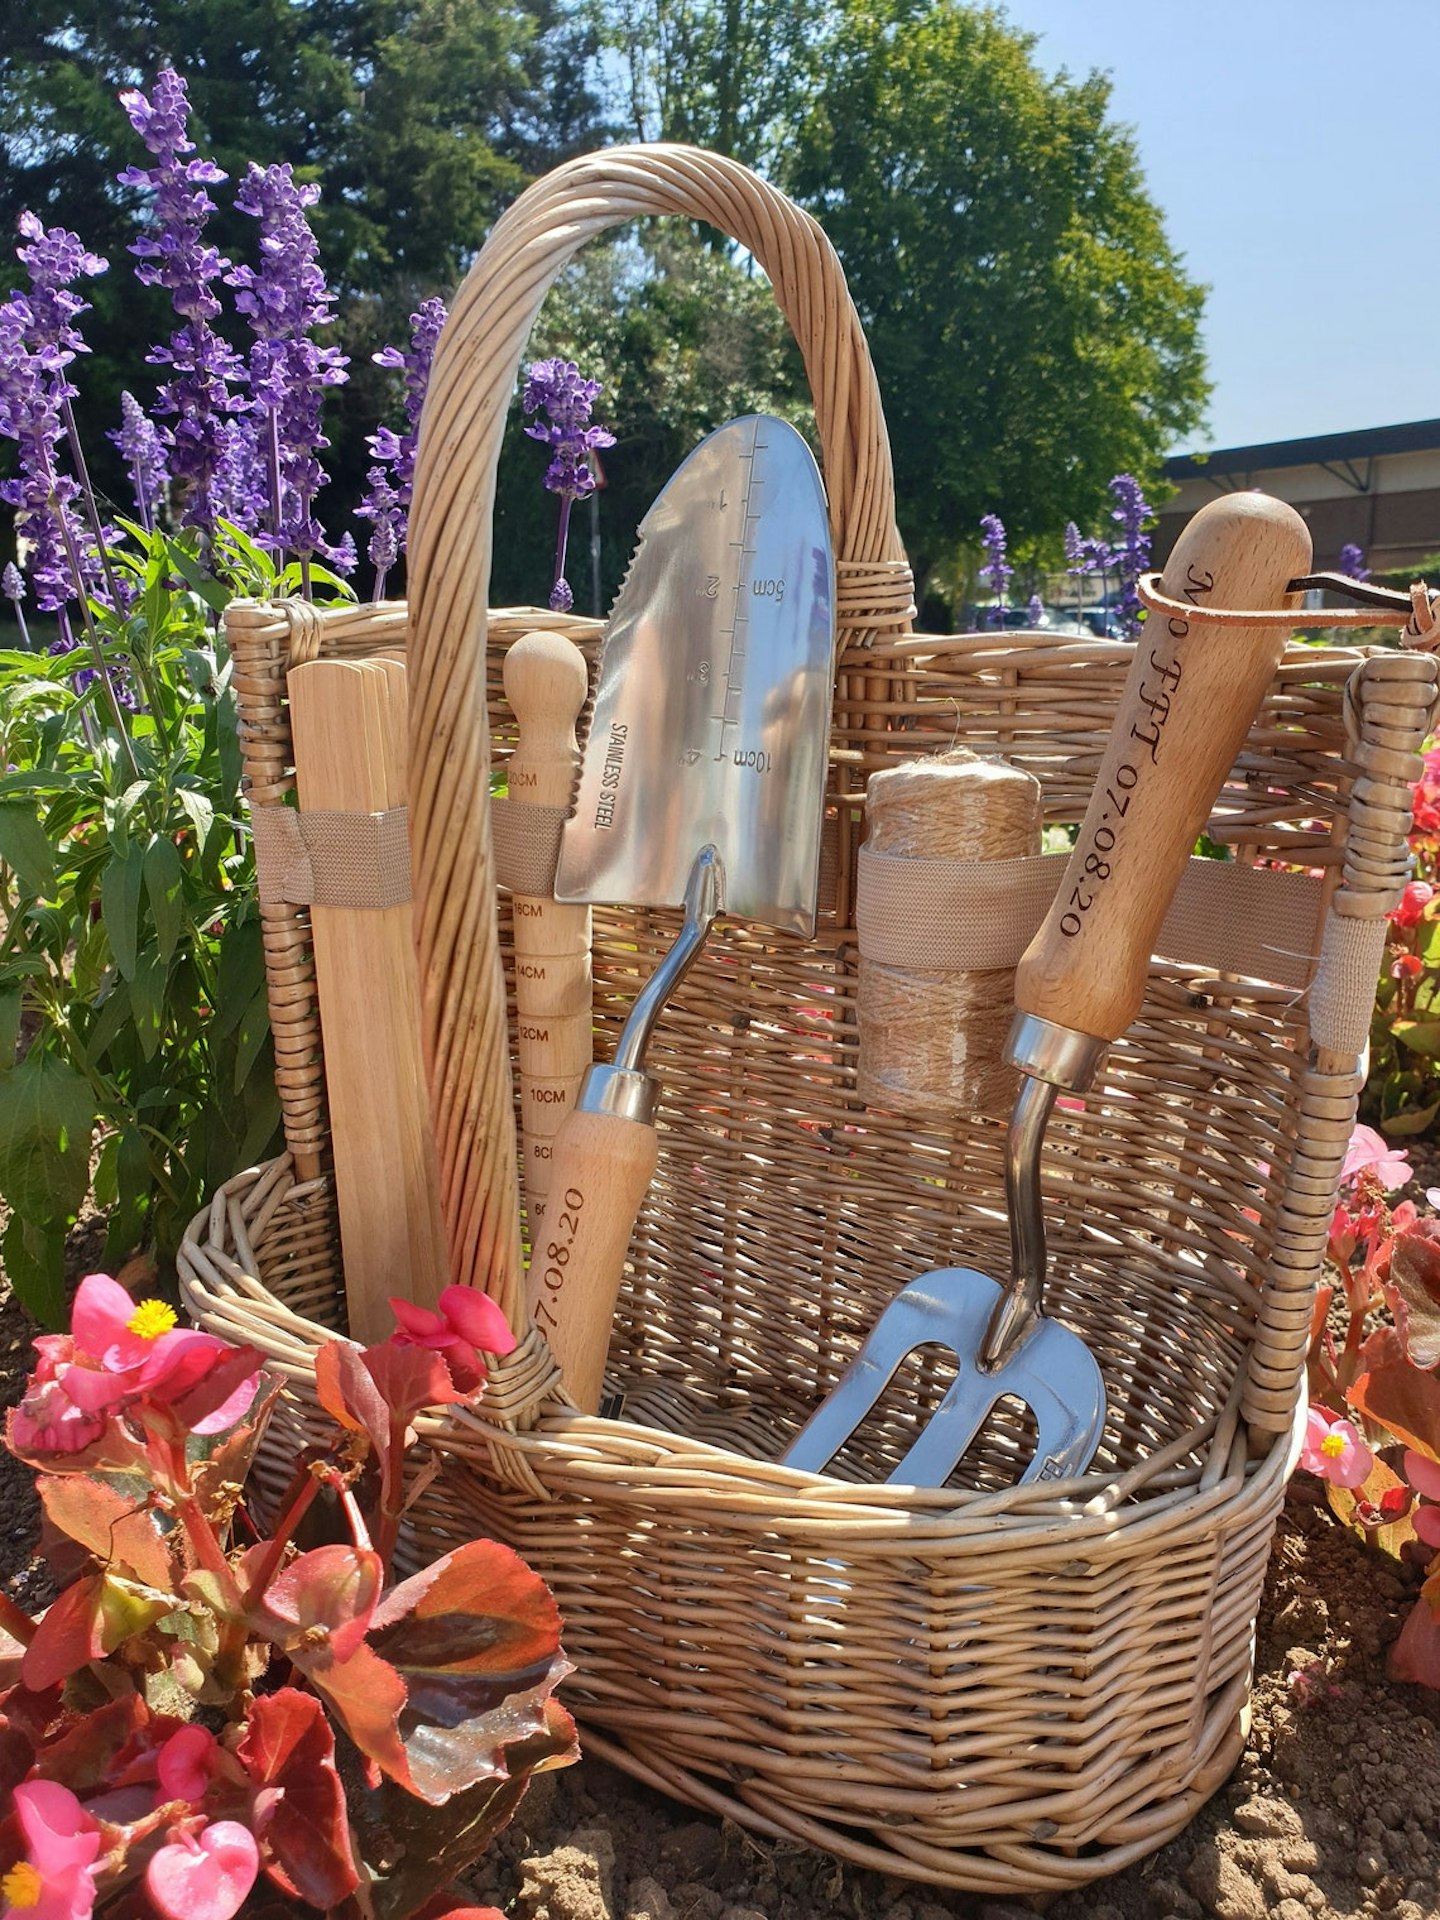 Etsy, Personalised Garden tool gift basket, From £38.99